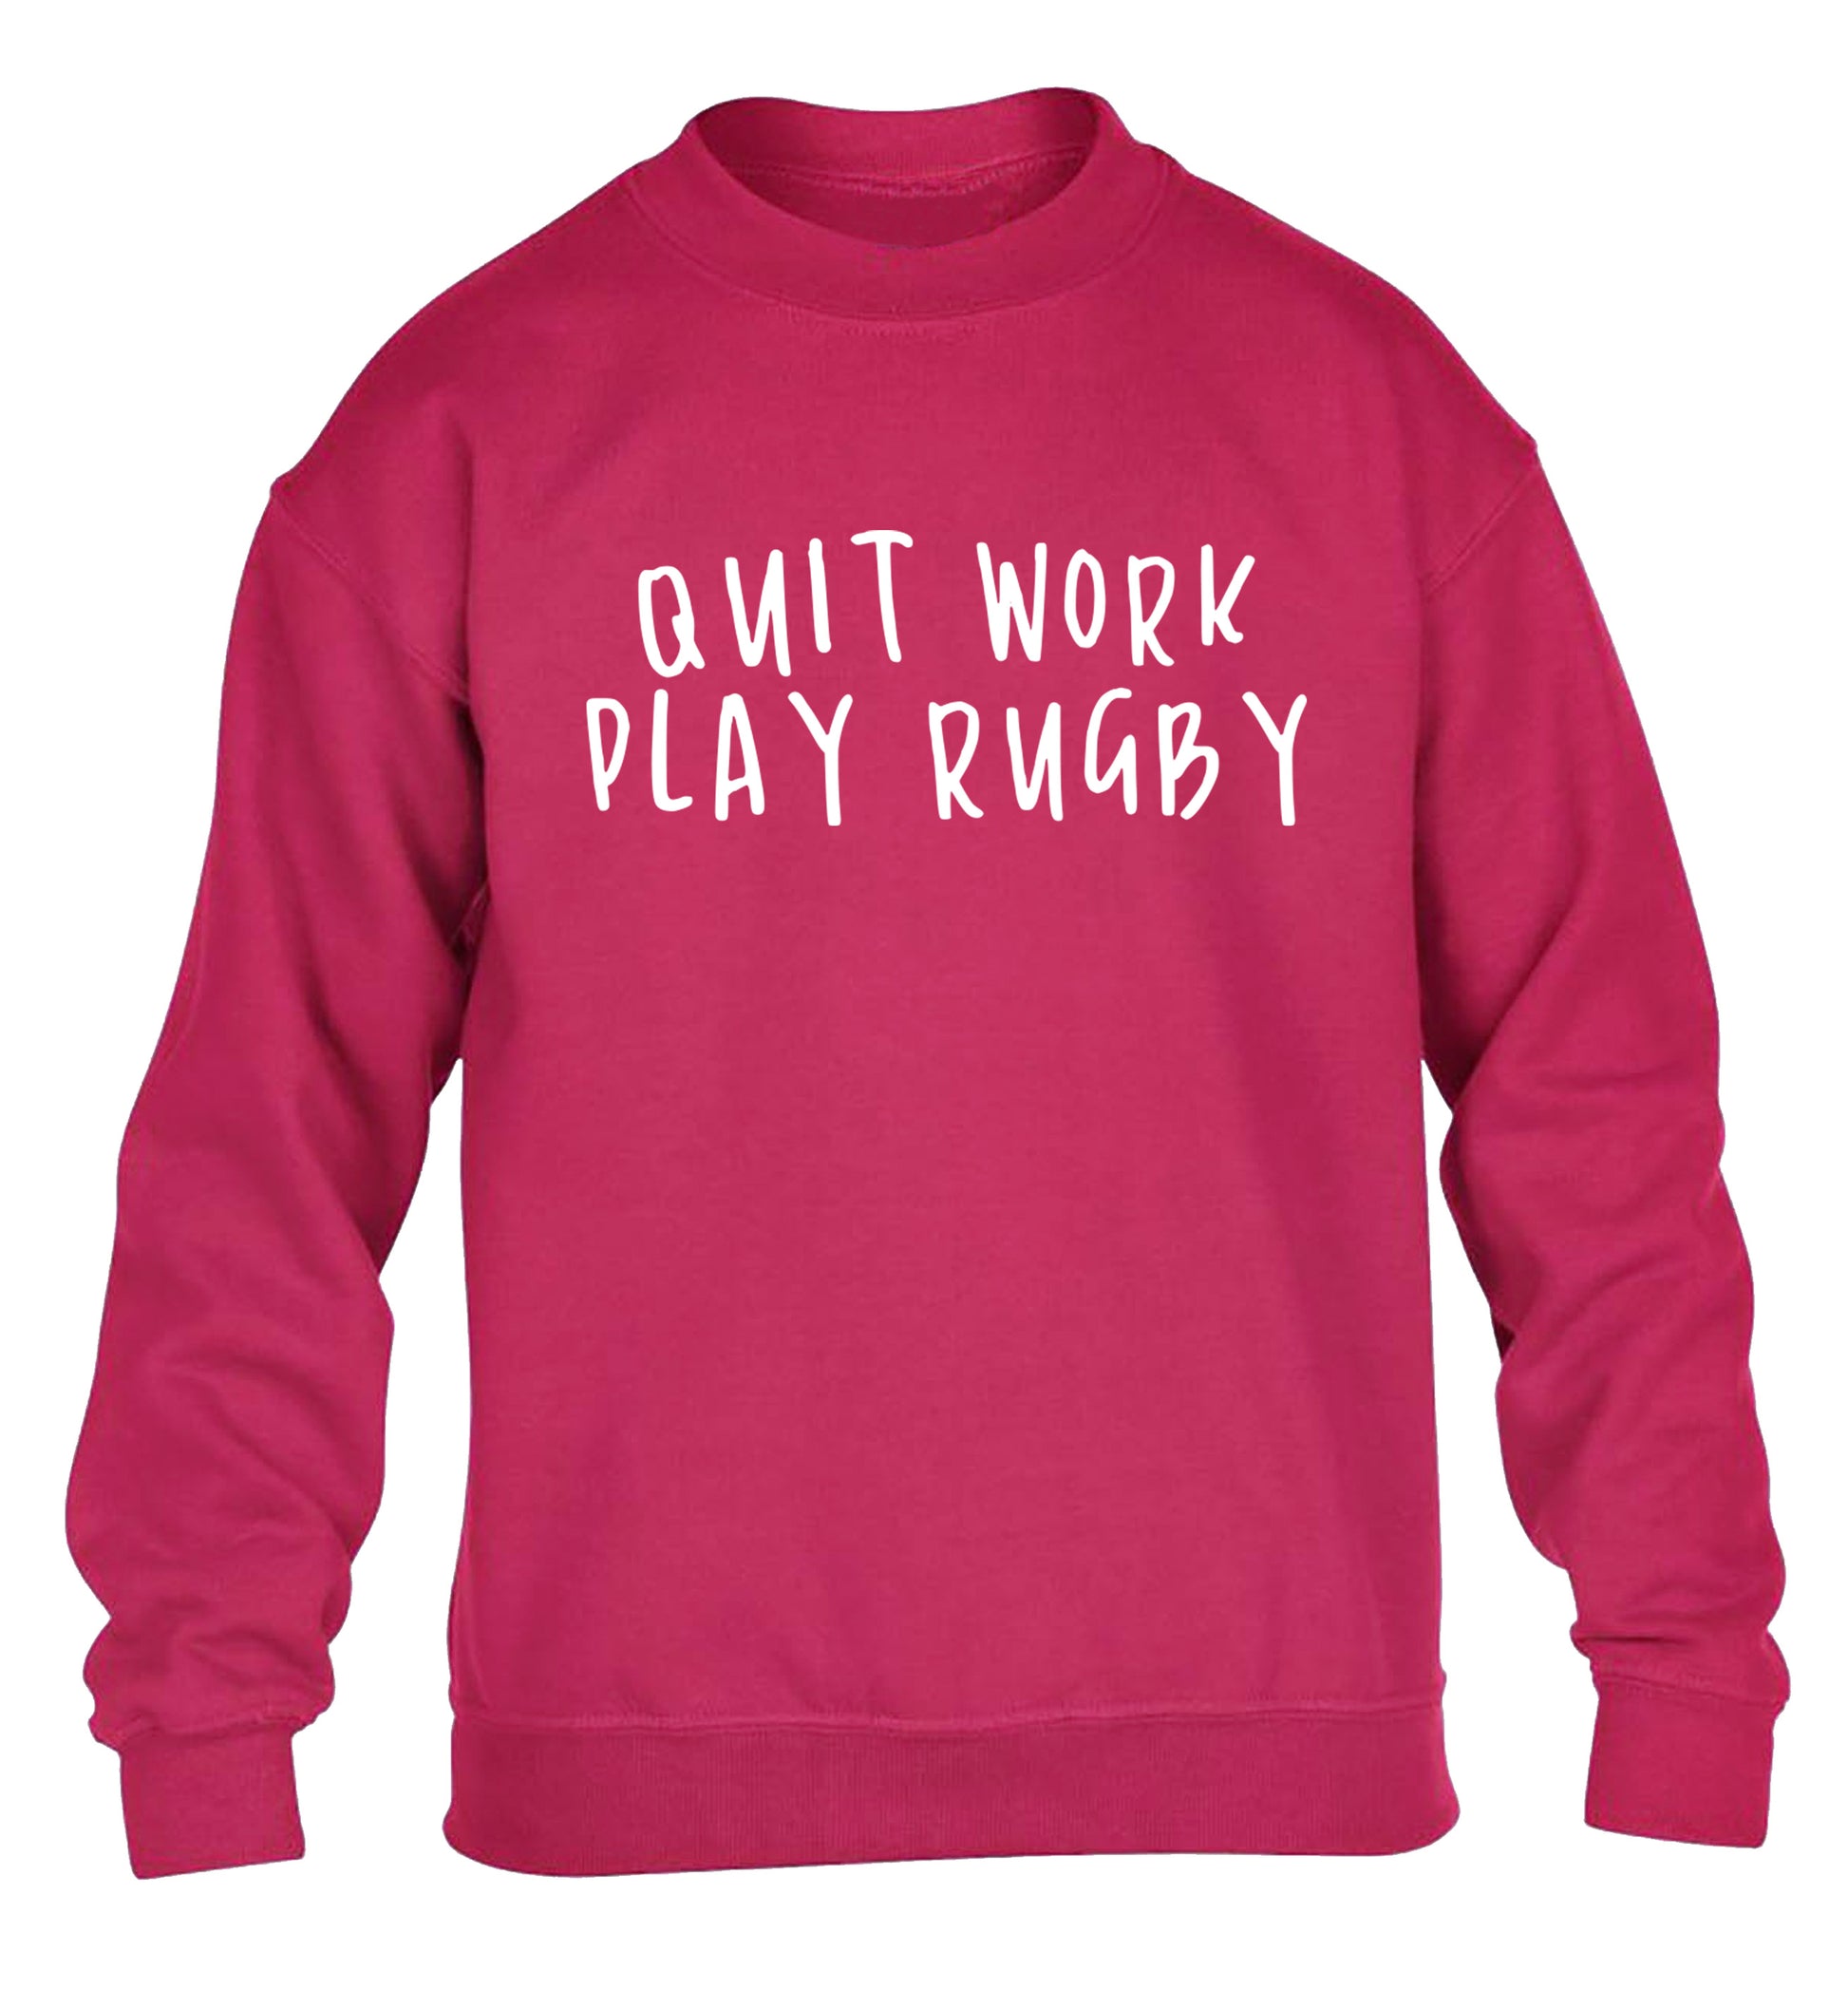 Quit work play rugby children's pink sweater 12-13 Years